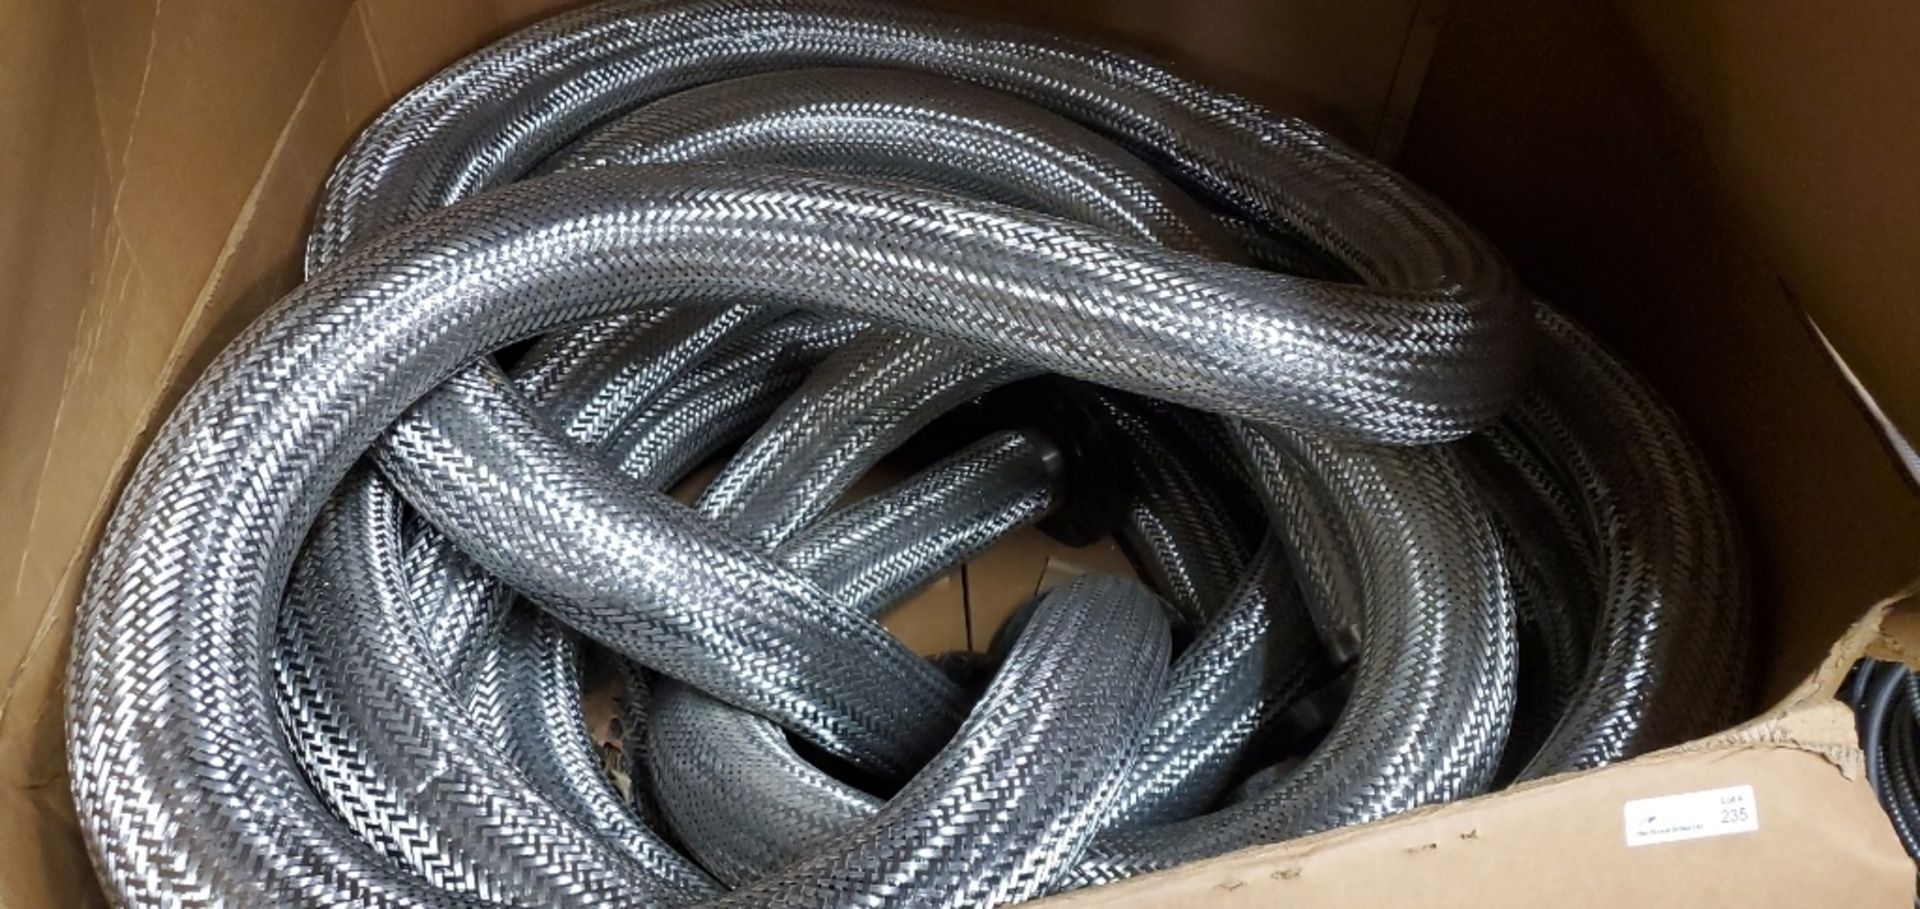 Skid Lot of 5 Dia Stainless Steel Braided Hoses"